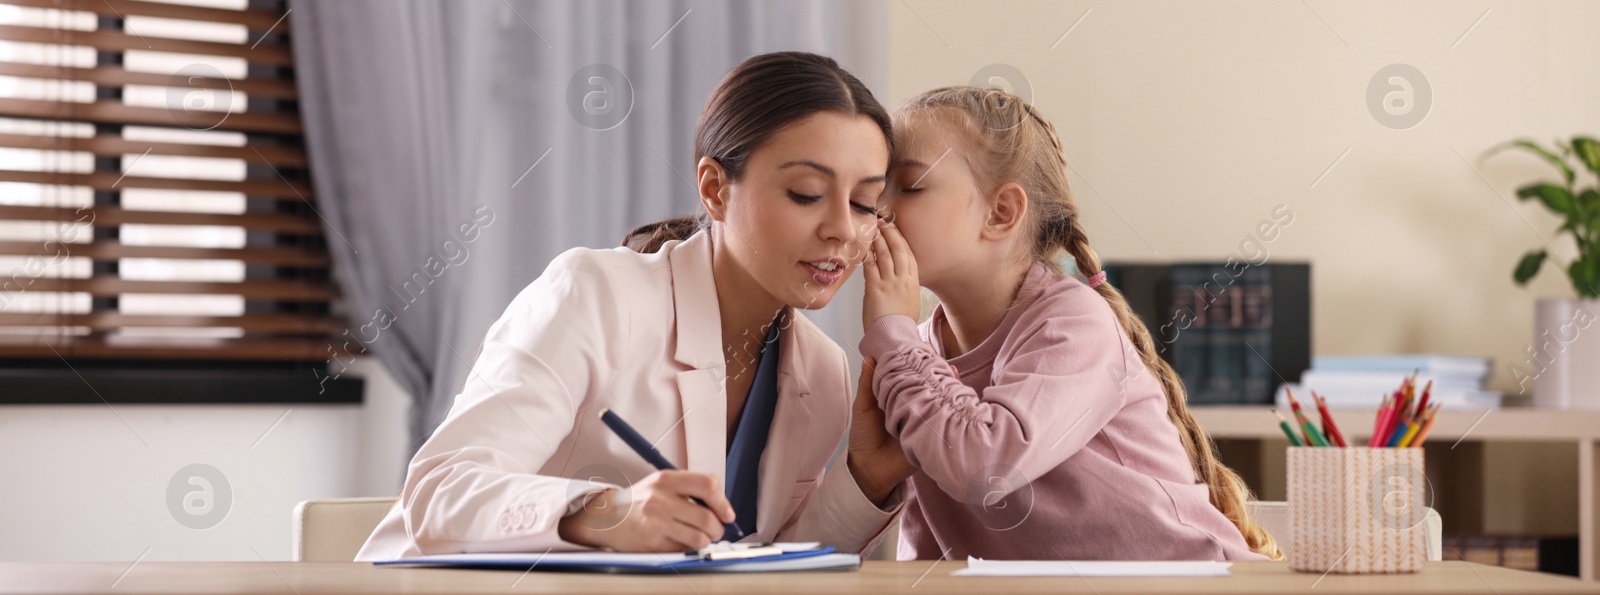 Image of Child psychotherapist working with little girl in office